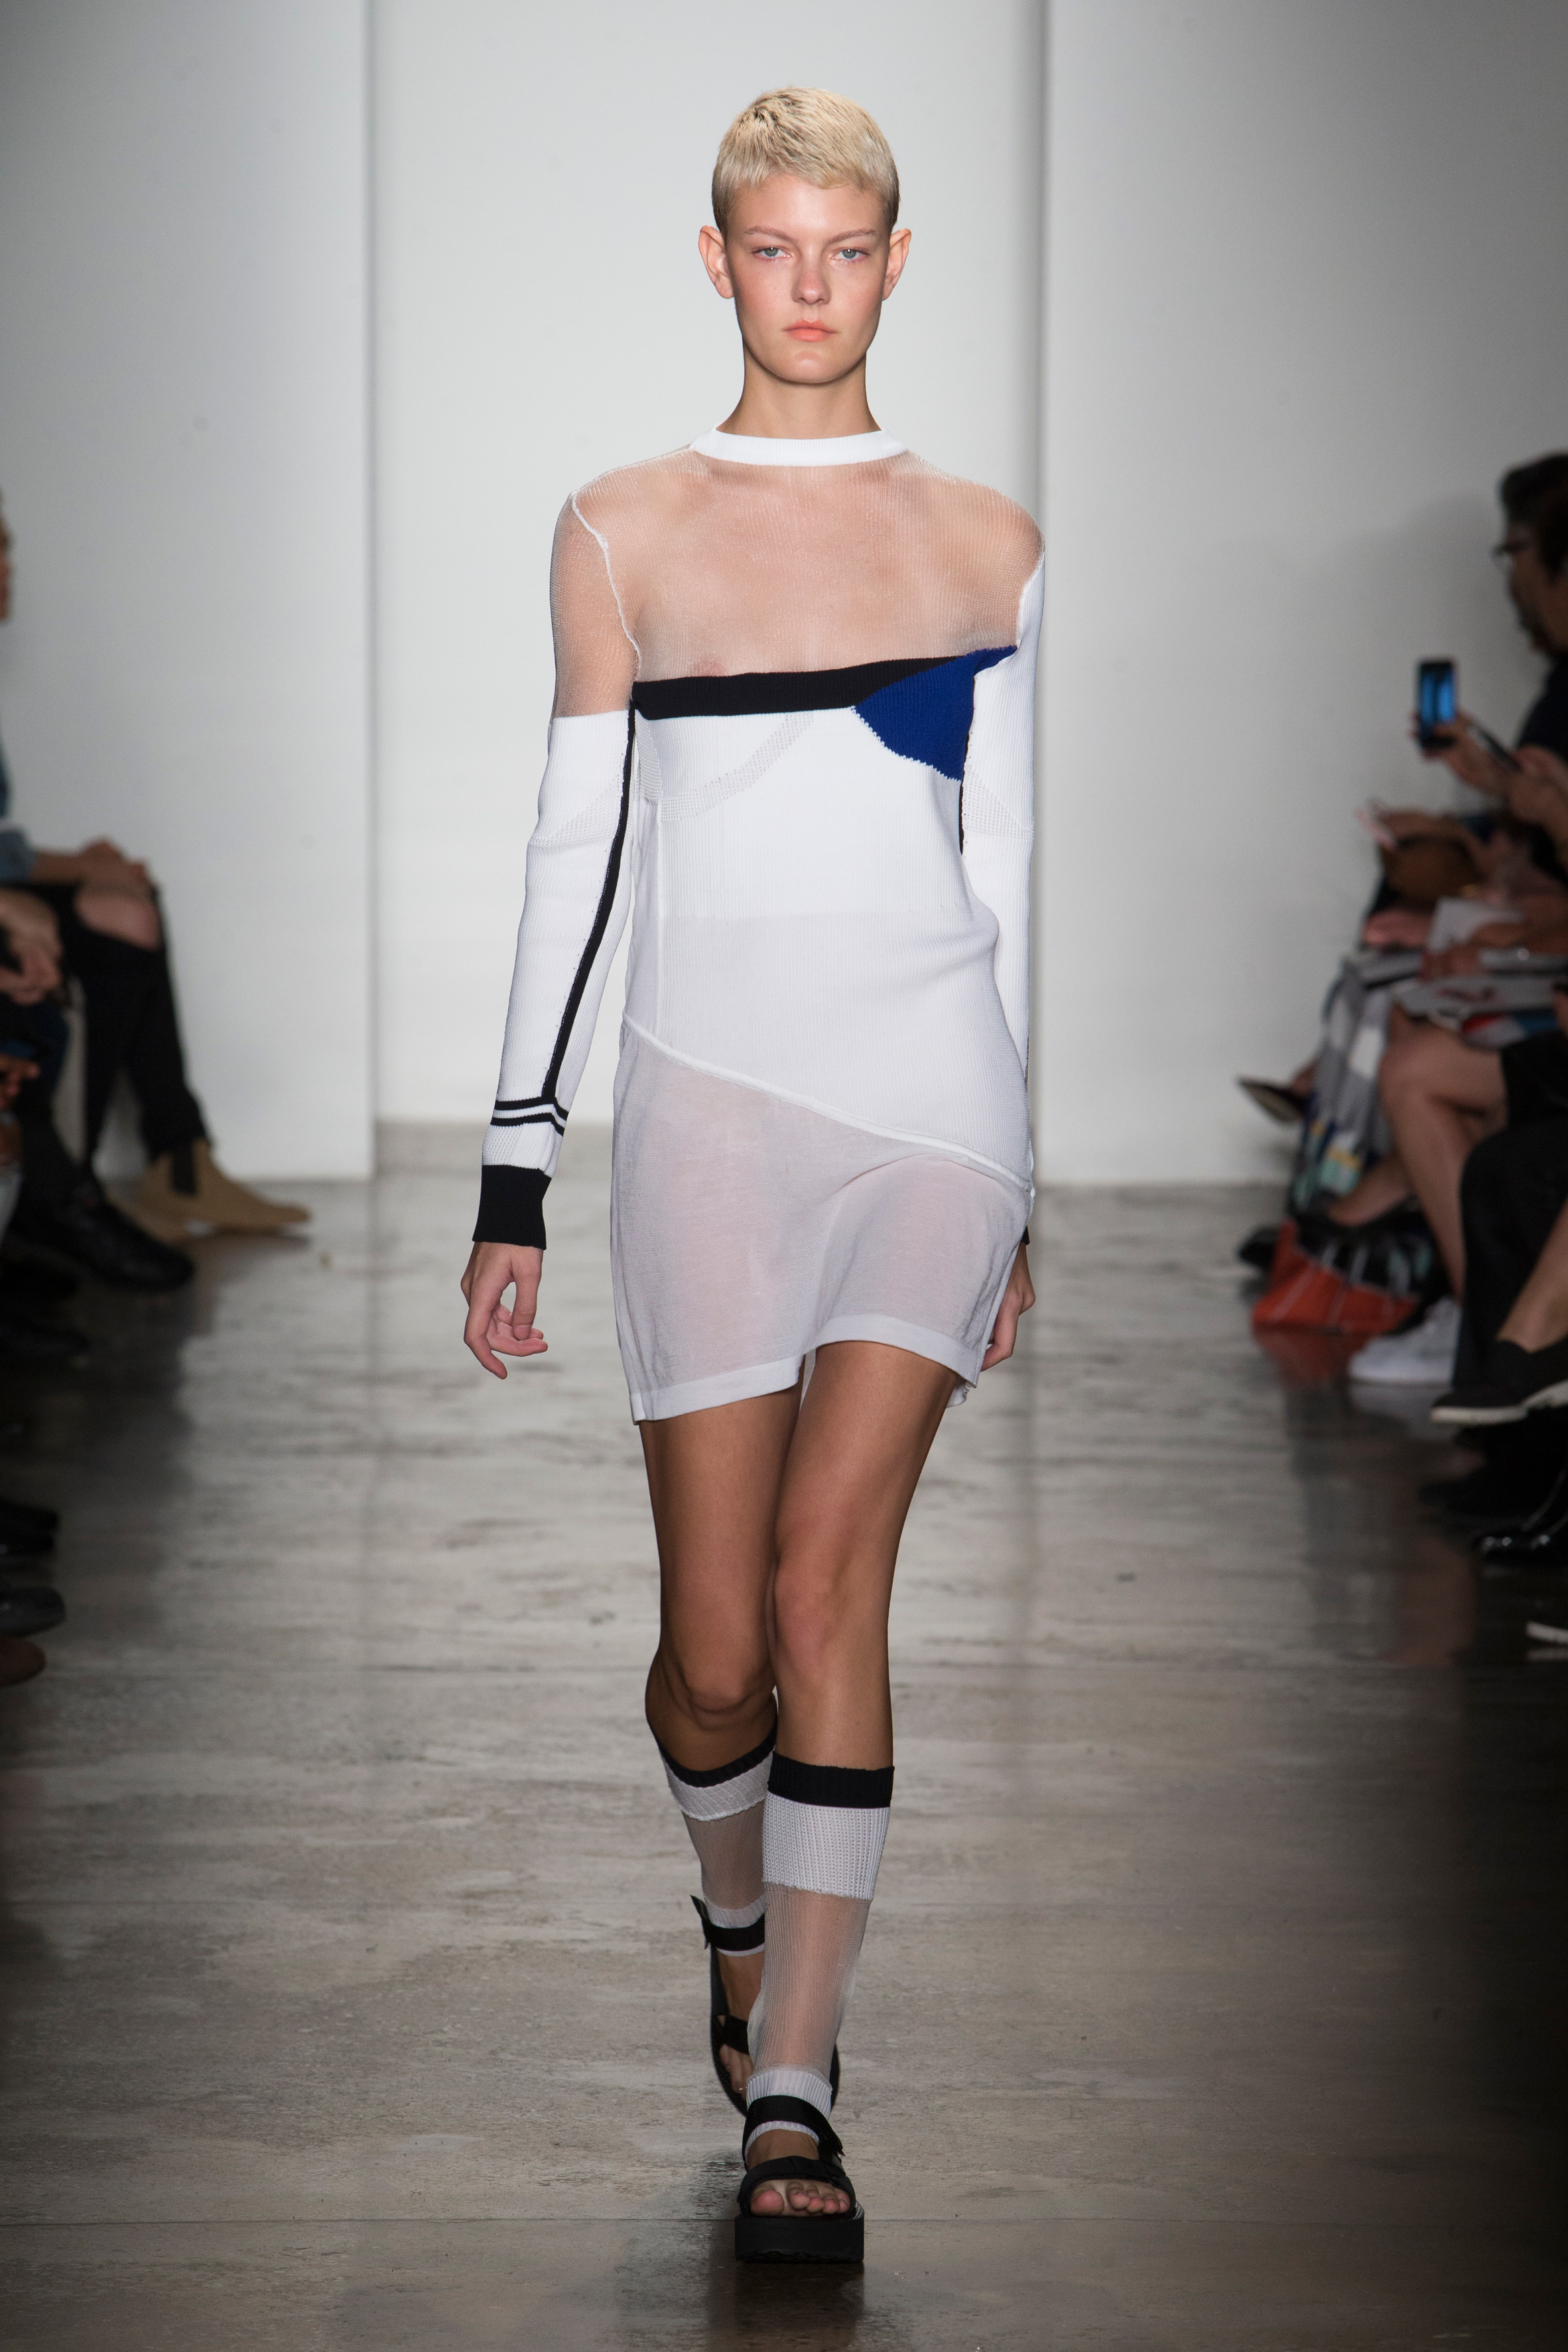 Anna-Maroe Gurber's graduate fashion collection from Parsons School of Design